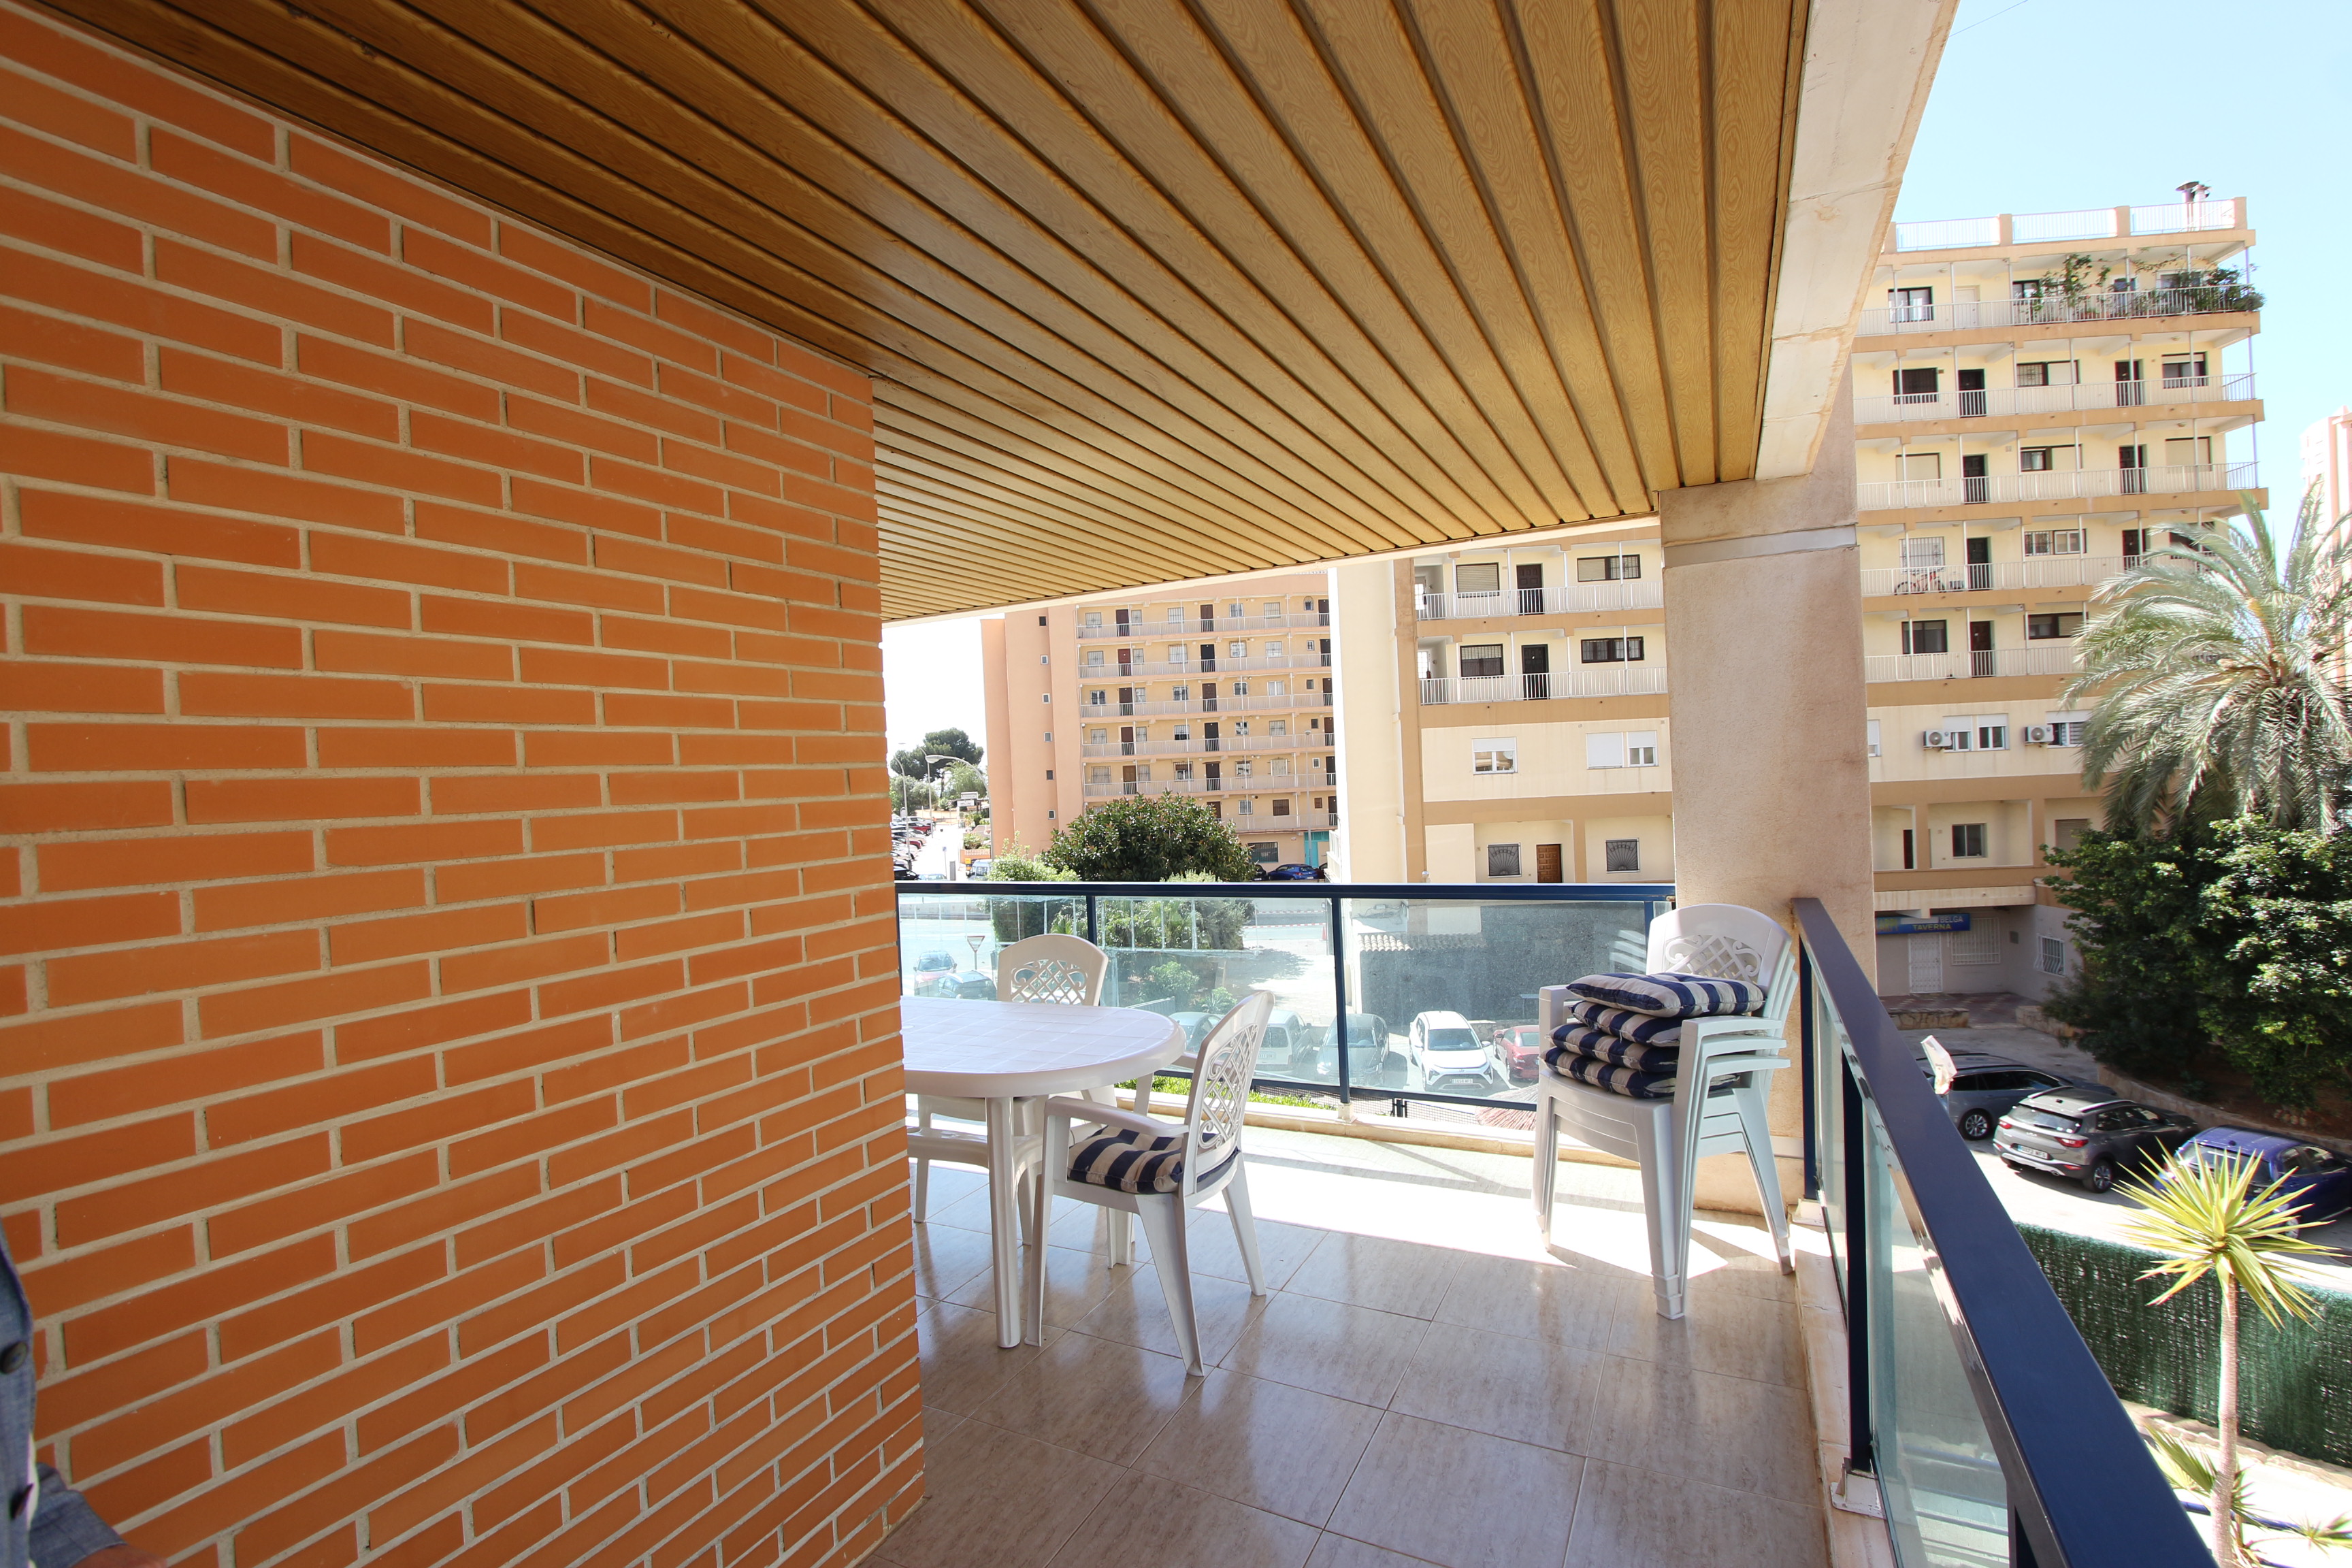 2 BEDROOM APARTMENT WITH SEA VIEWS, NEXT TO THE BEACH IN CALPE